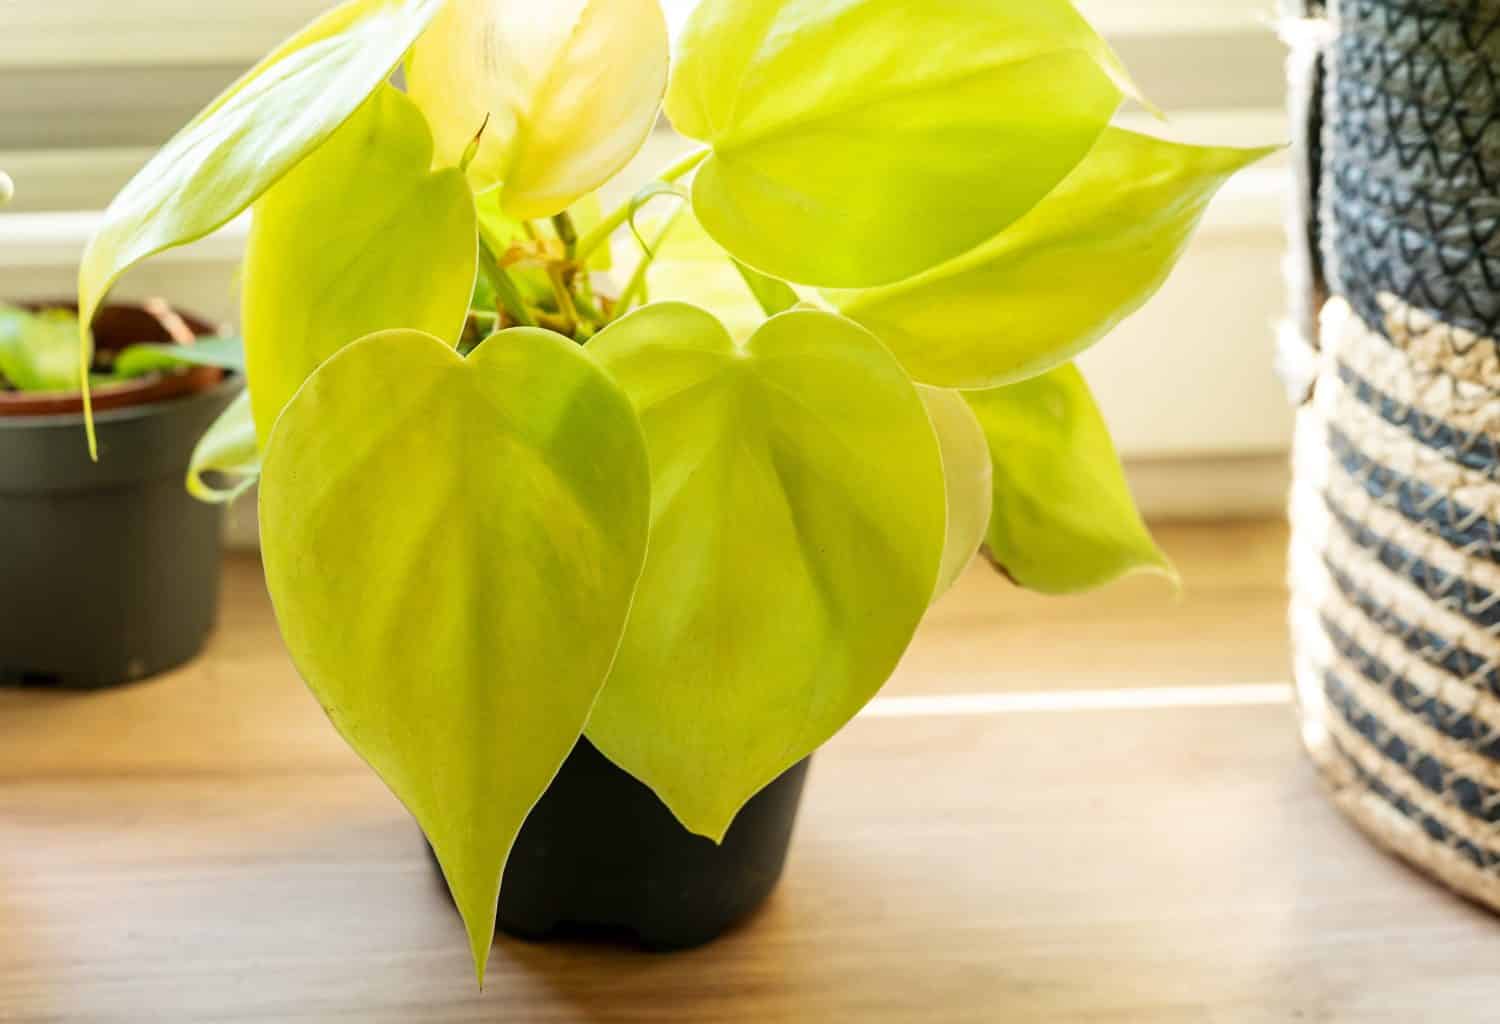 philodendron scadens lemon lime in the pot at home. Indoor gardening. Hobby. Green houseplants. Modern room decor, interior. Lifestyle, Still life with plants